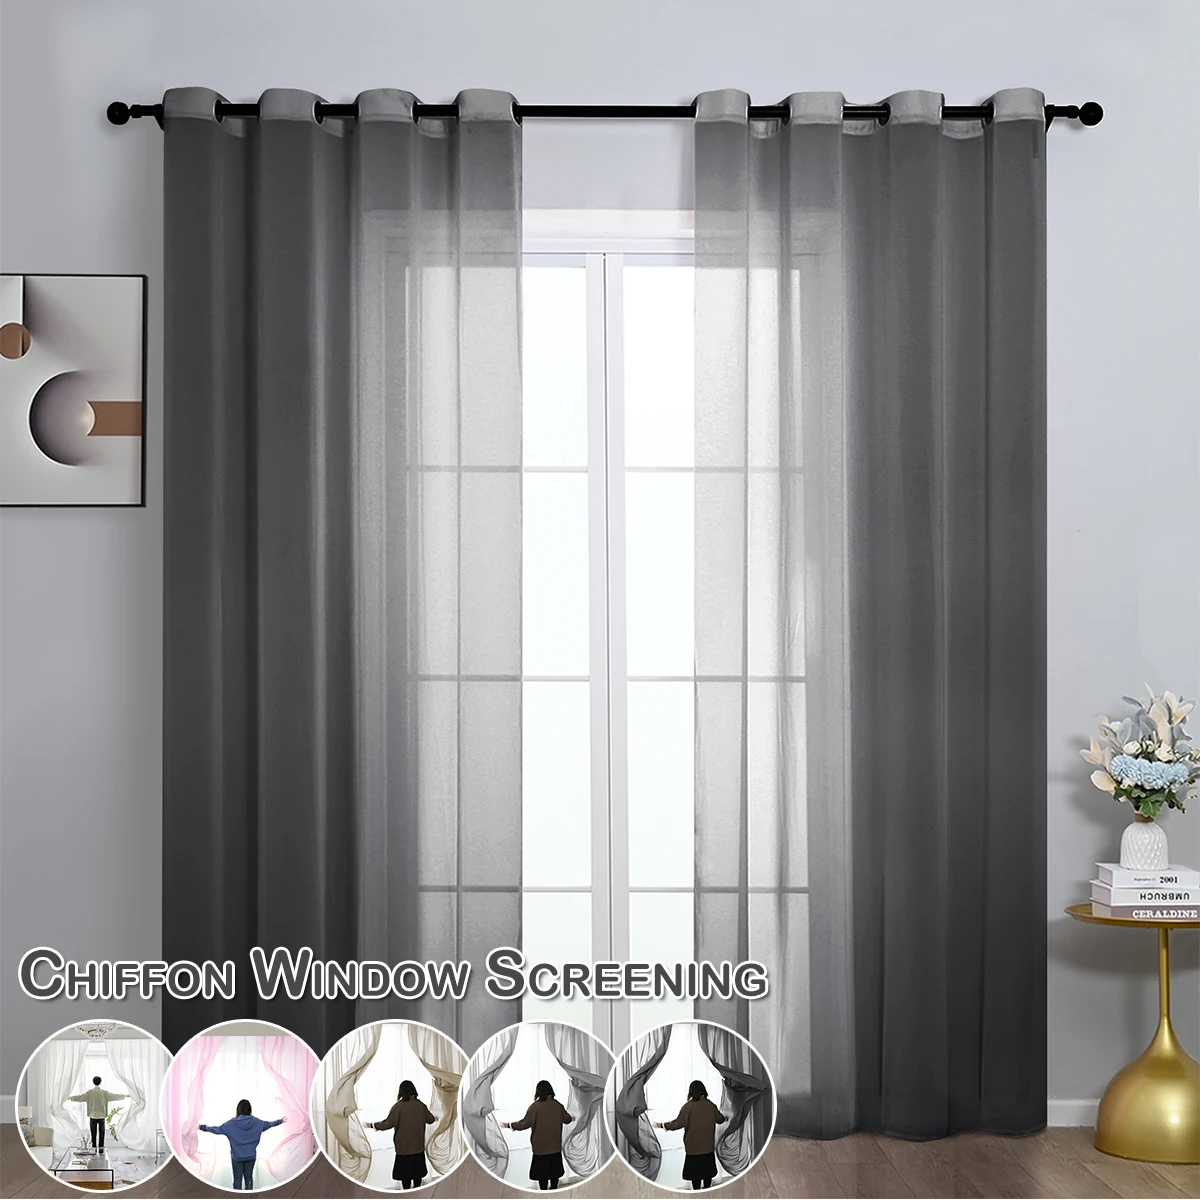 

Modern Window Screening Solid Colour Chiffon Tulle Sheer Curtains Solid Colour Gauze Drap Curtain For Living Room Home Decor D30